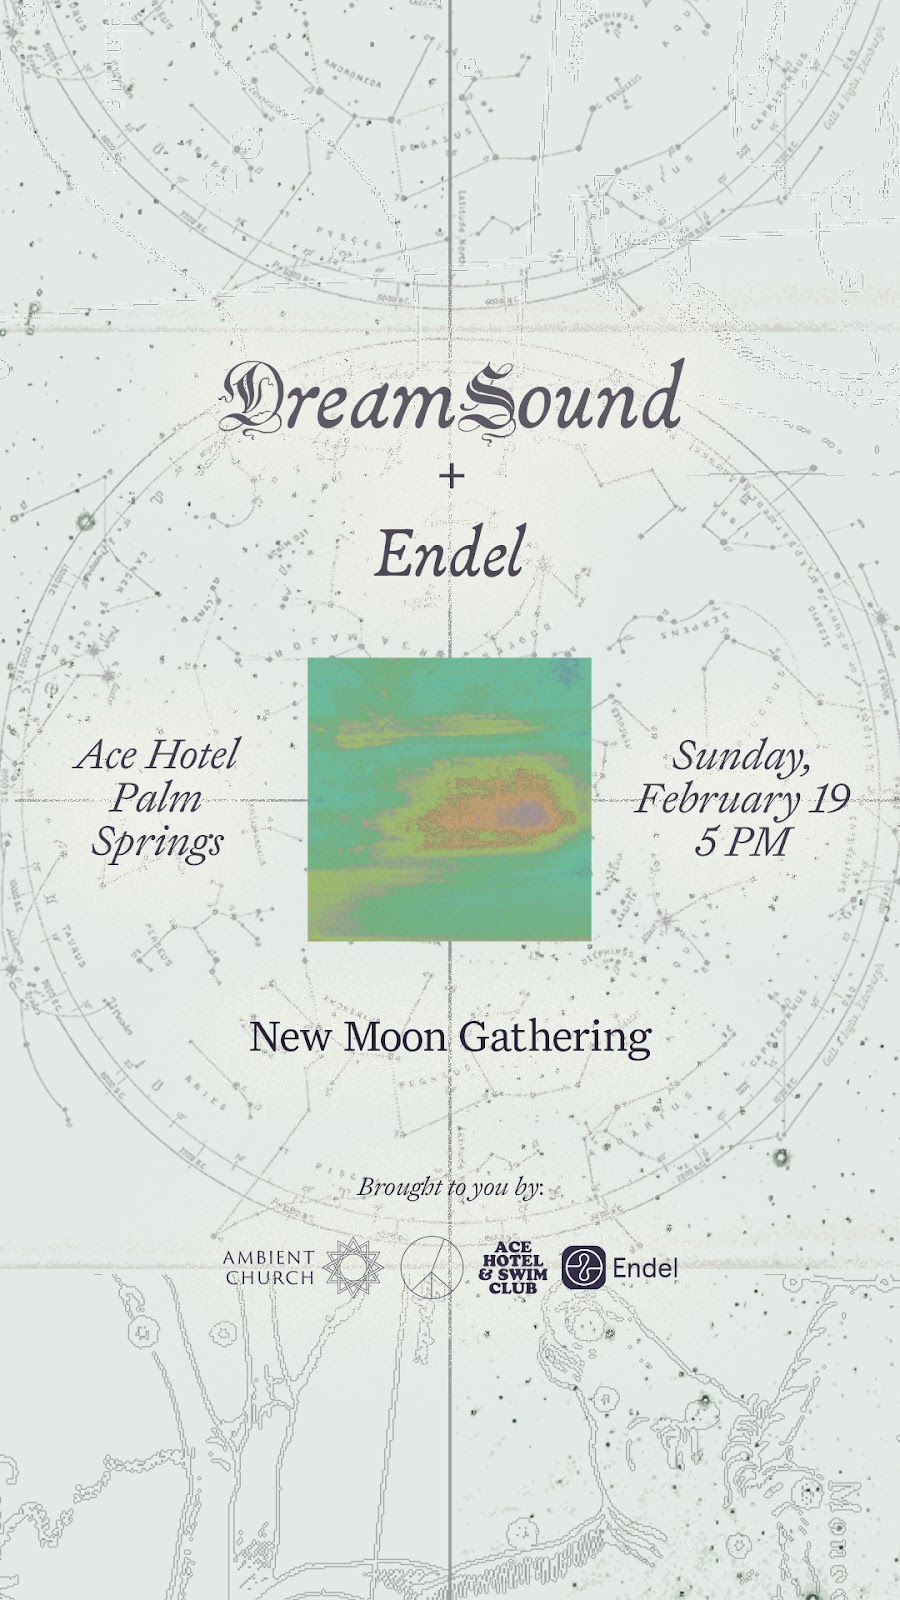 Ambient Church and Endel Present Dream Sound